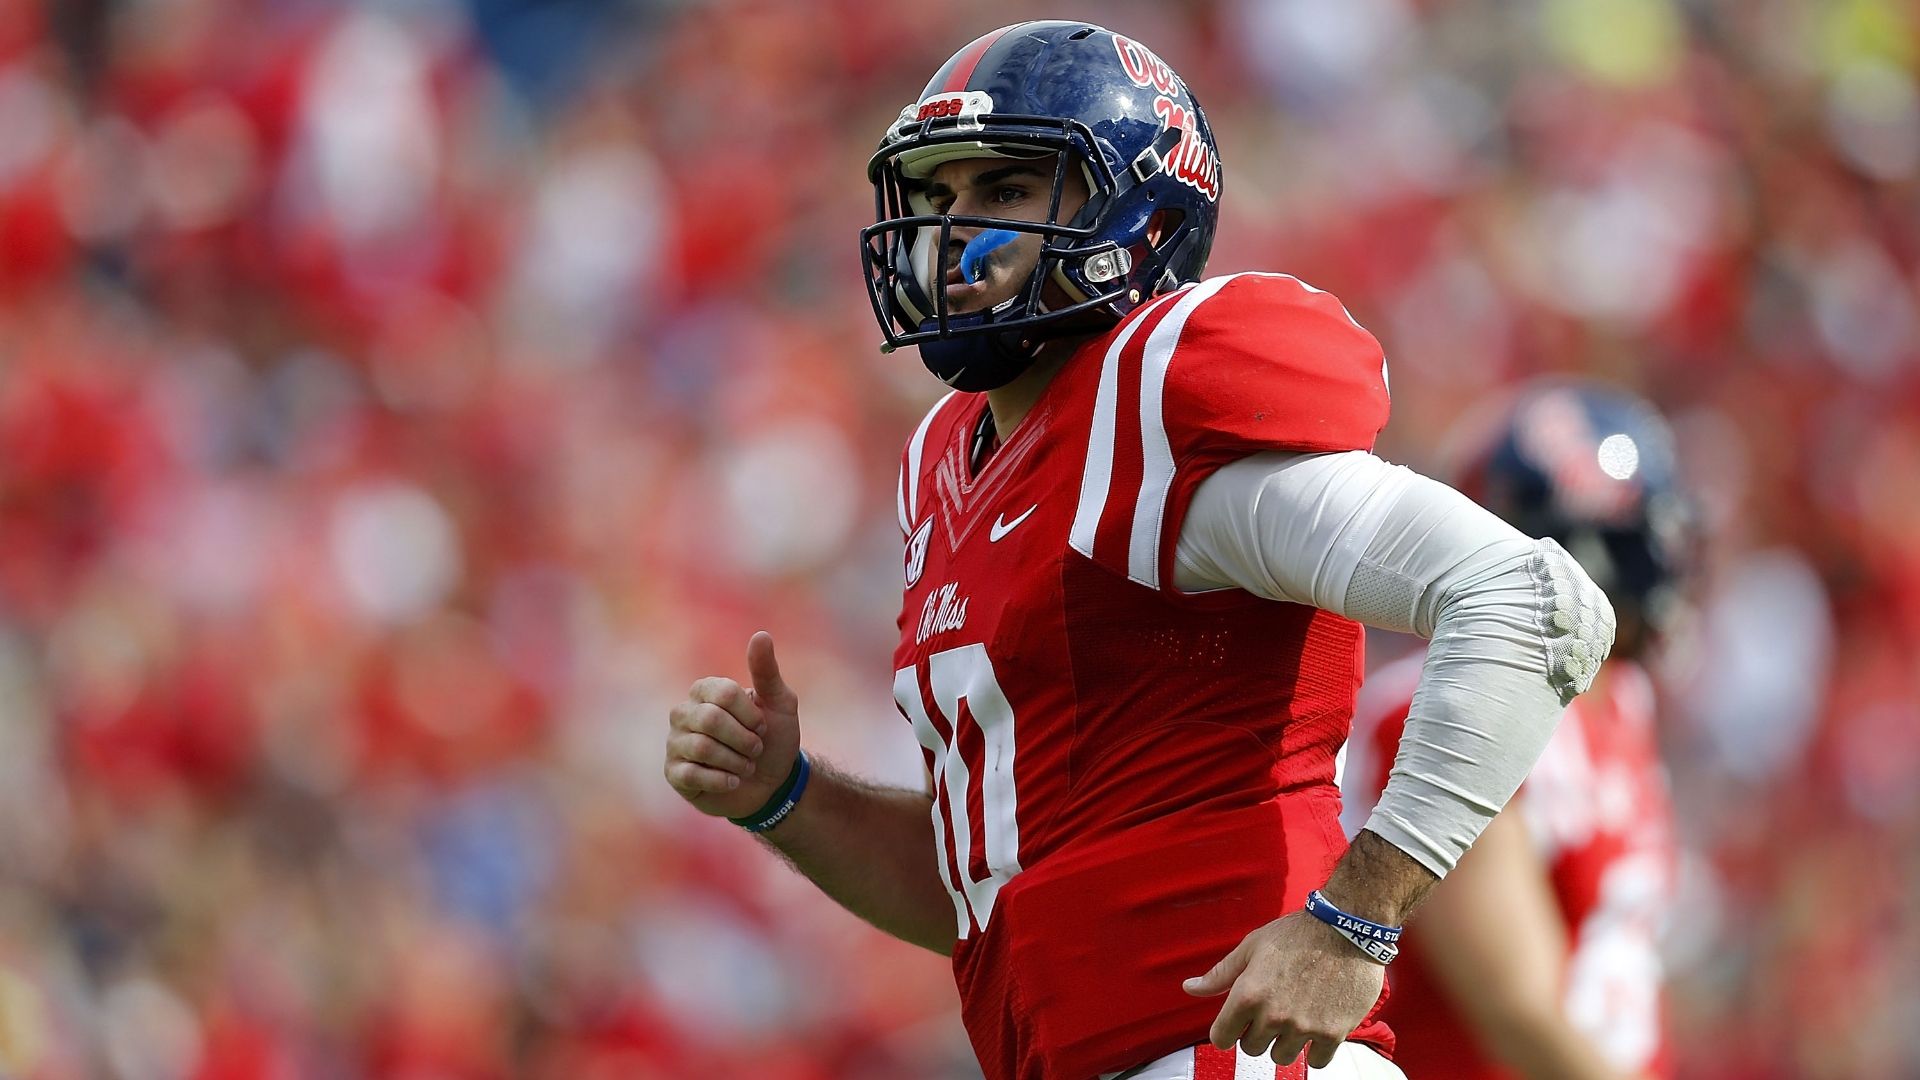 Former Rebels QB Kelly: Never count out a Saban team